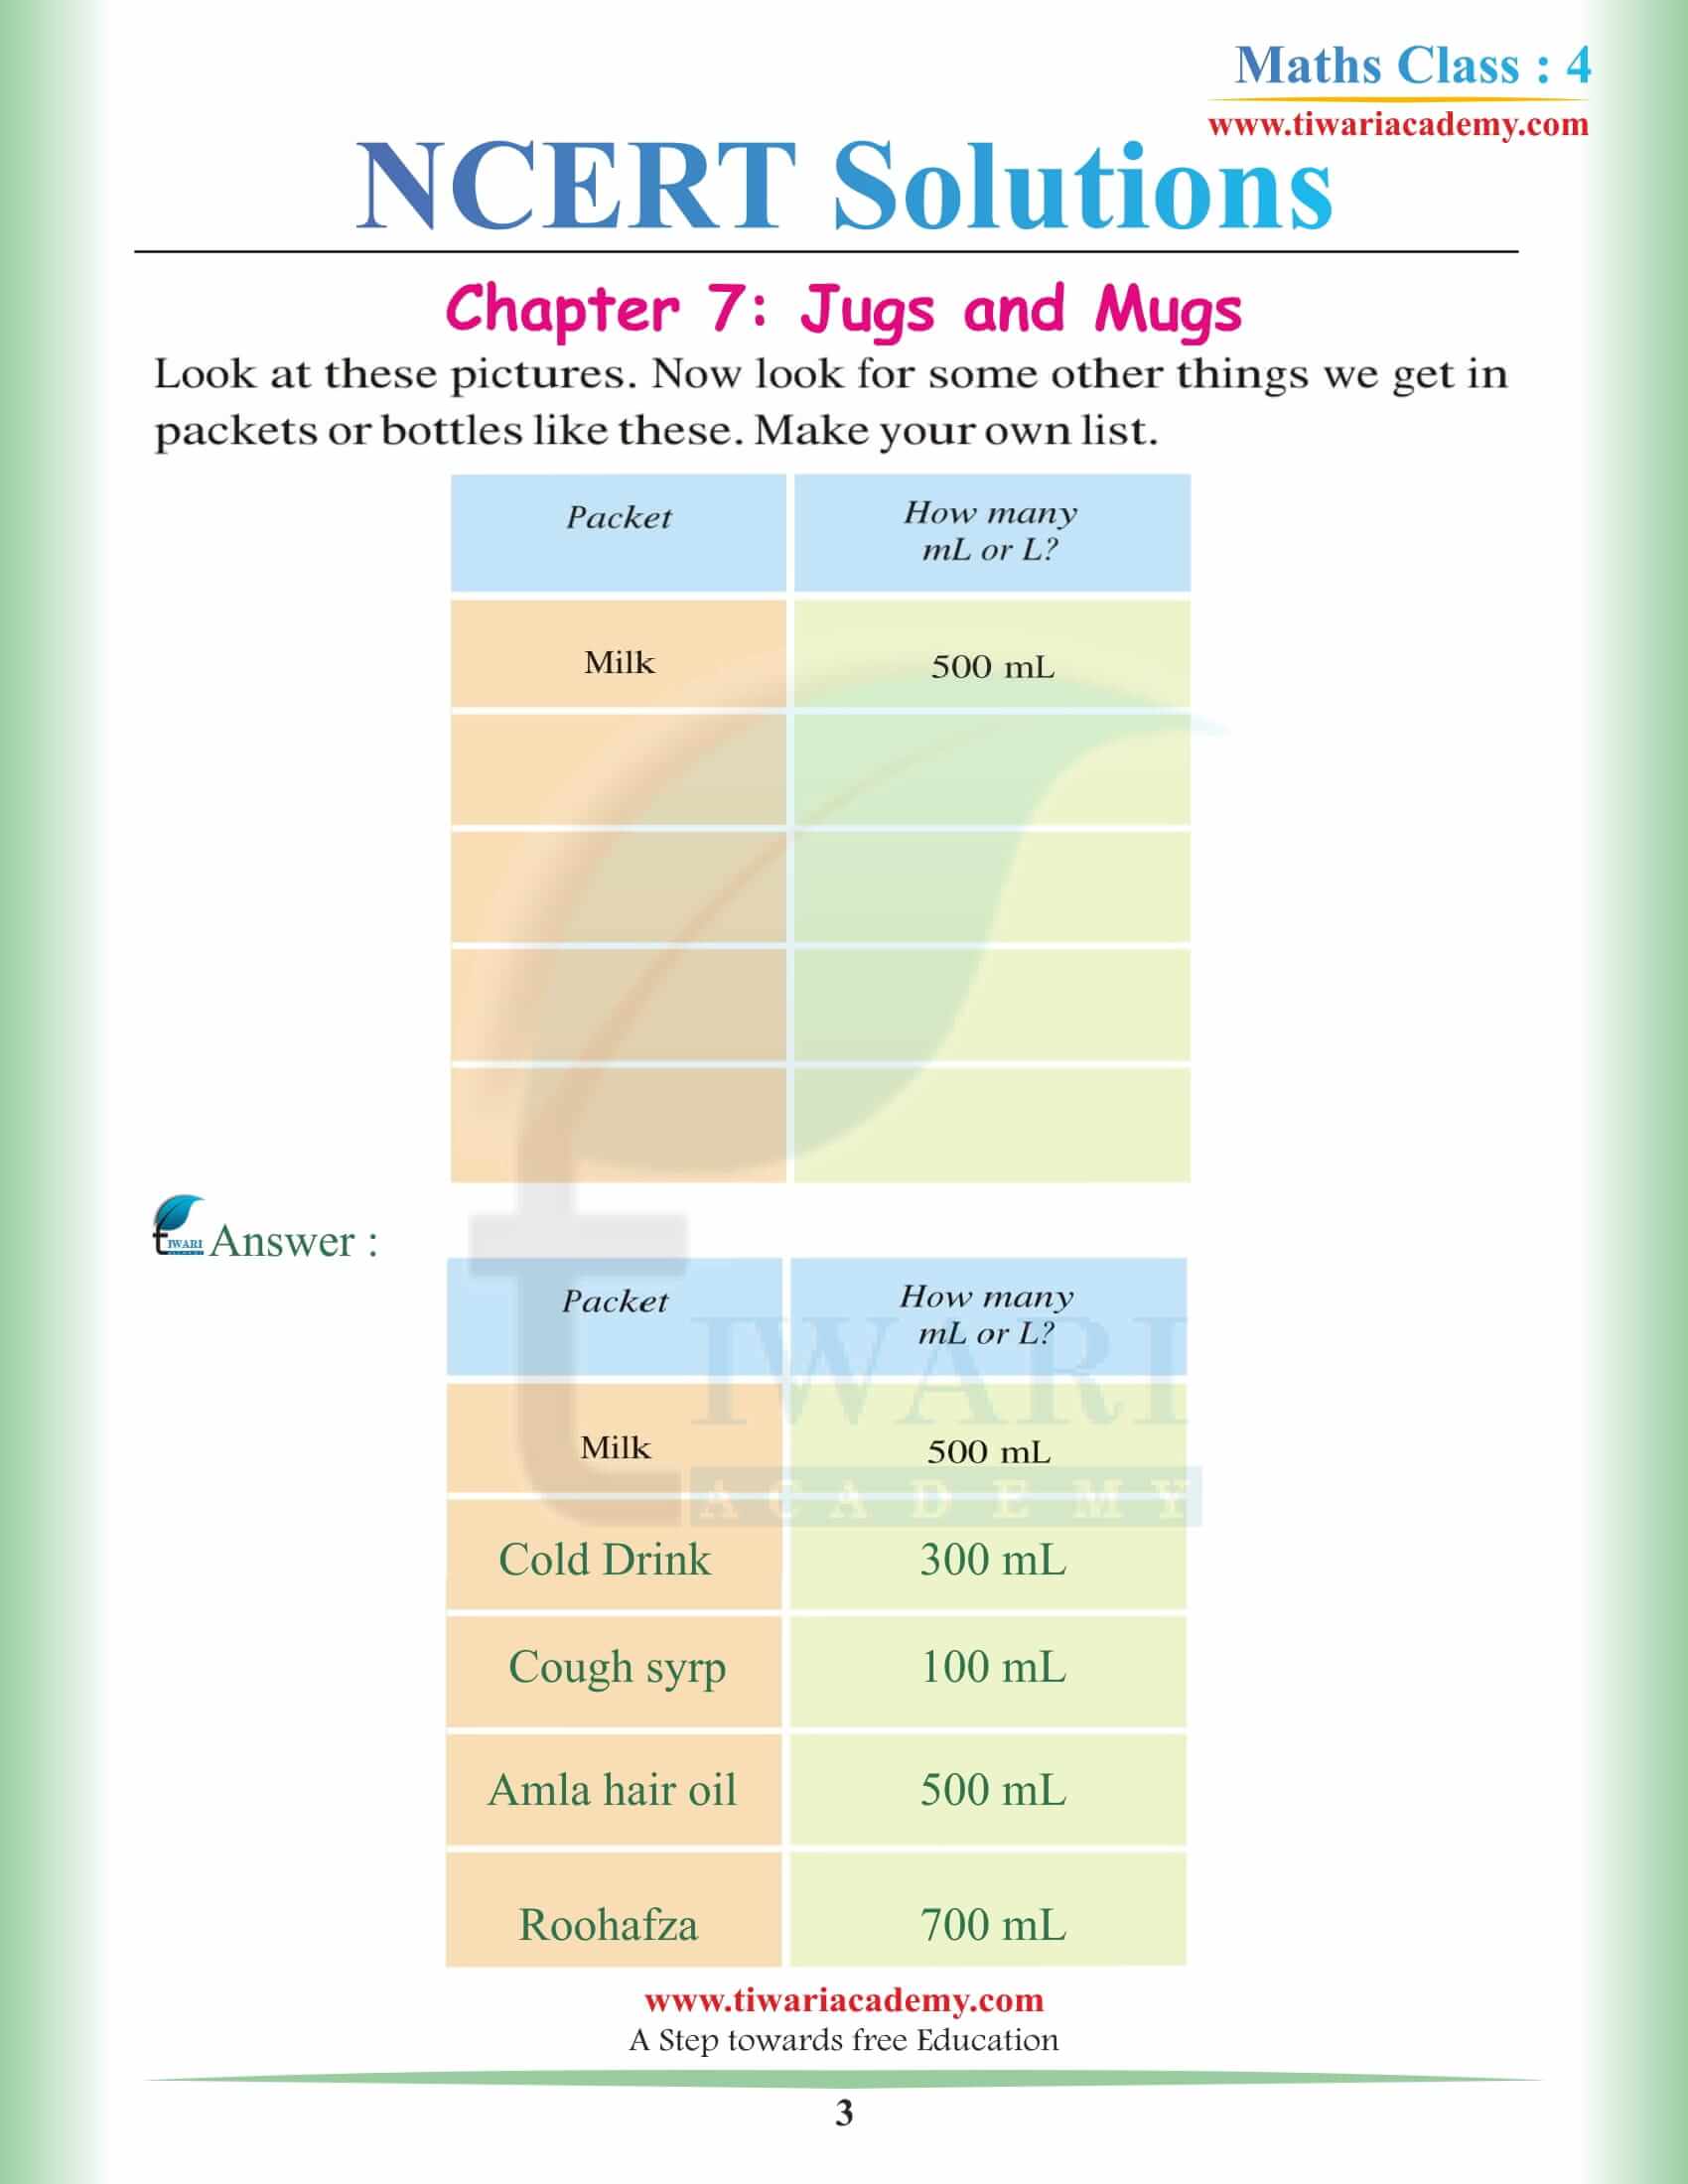 NCERT Solutions for Class 4 Maths Chapter 7 in PDF